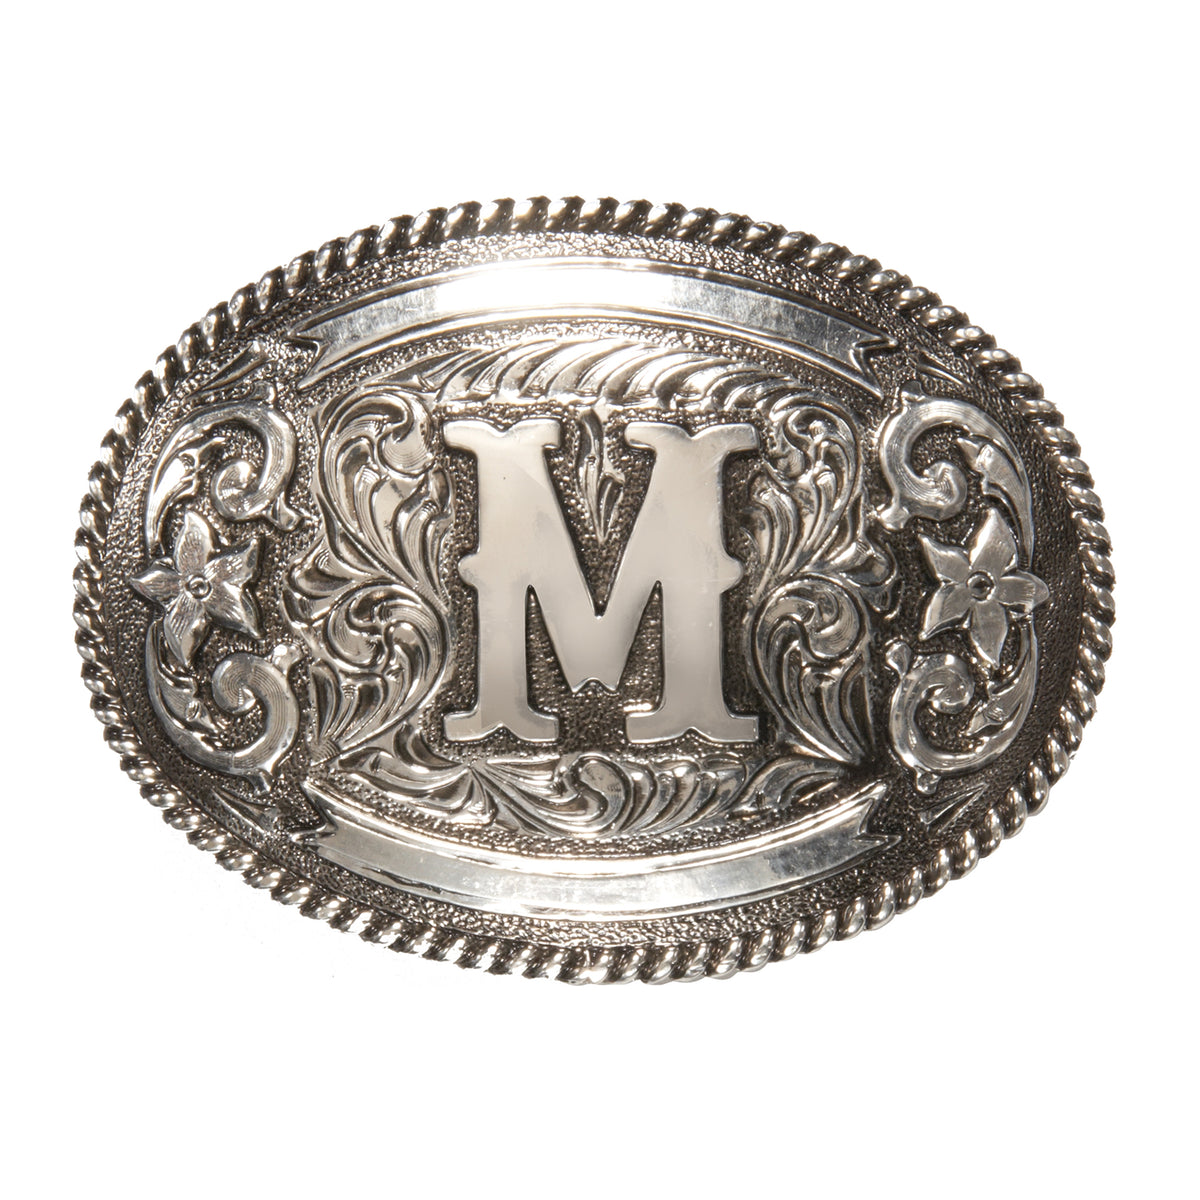 Initial “M” Buckle